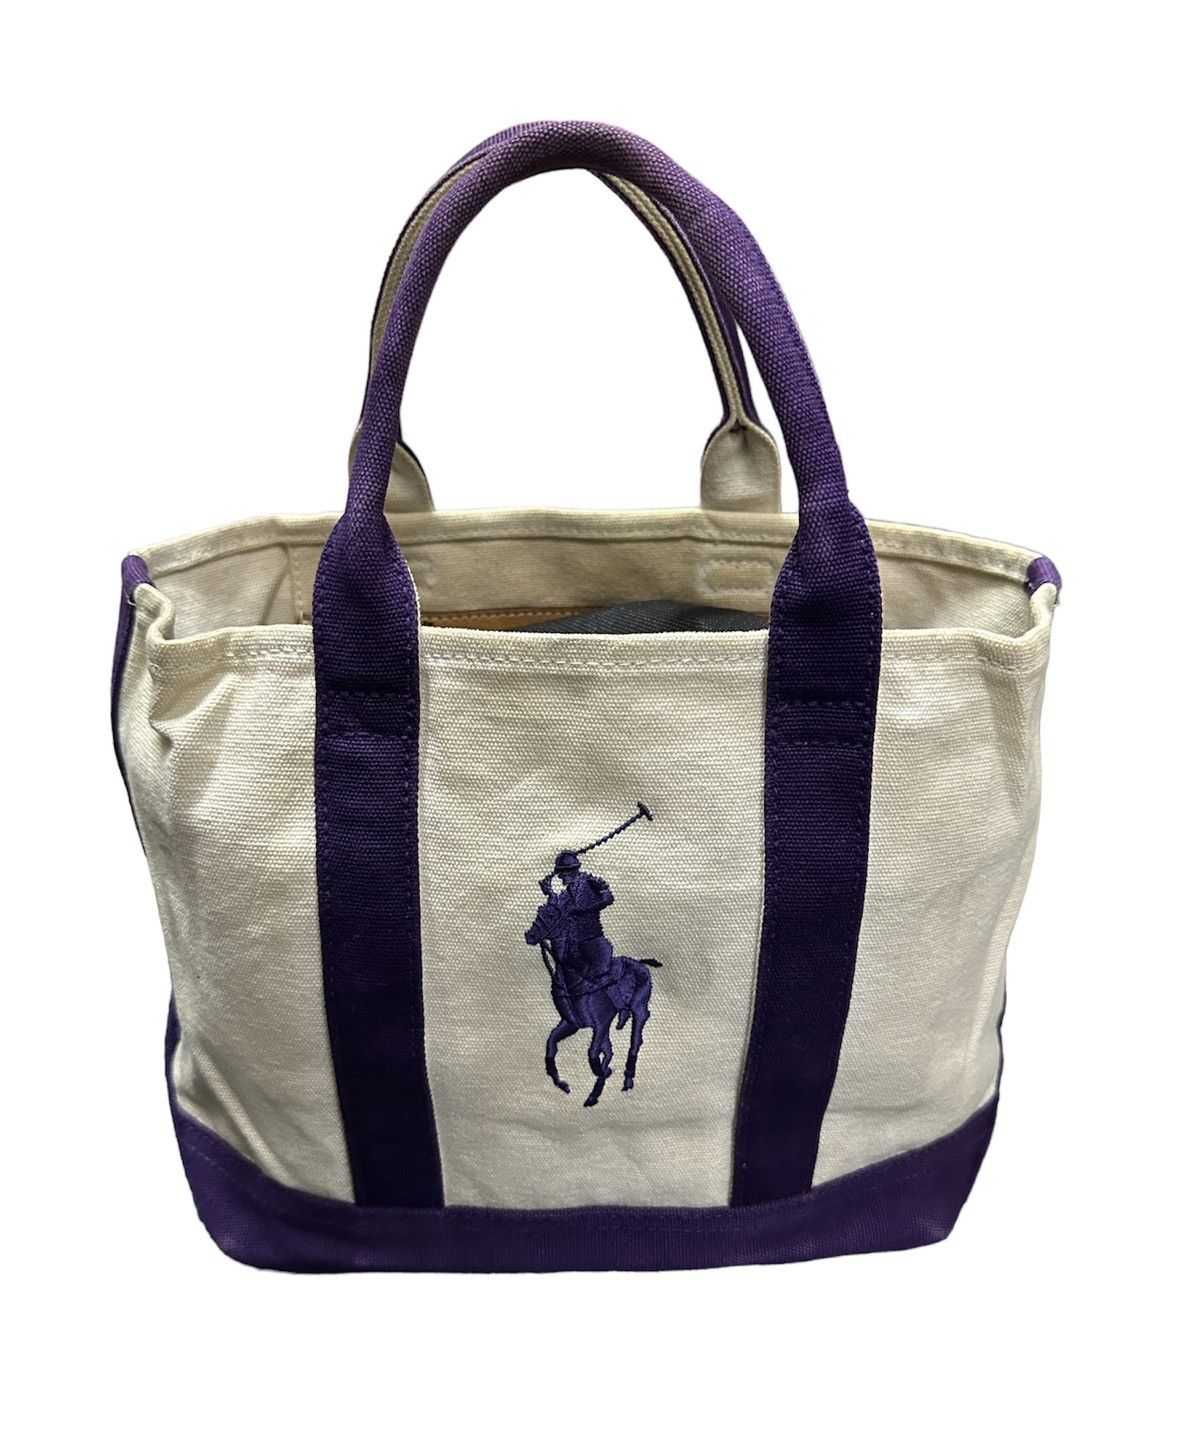 Polo Ralph Lauren Canvas Big Pony Tote Bag - OS – Jak of all Vintage